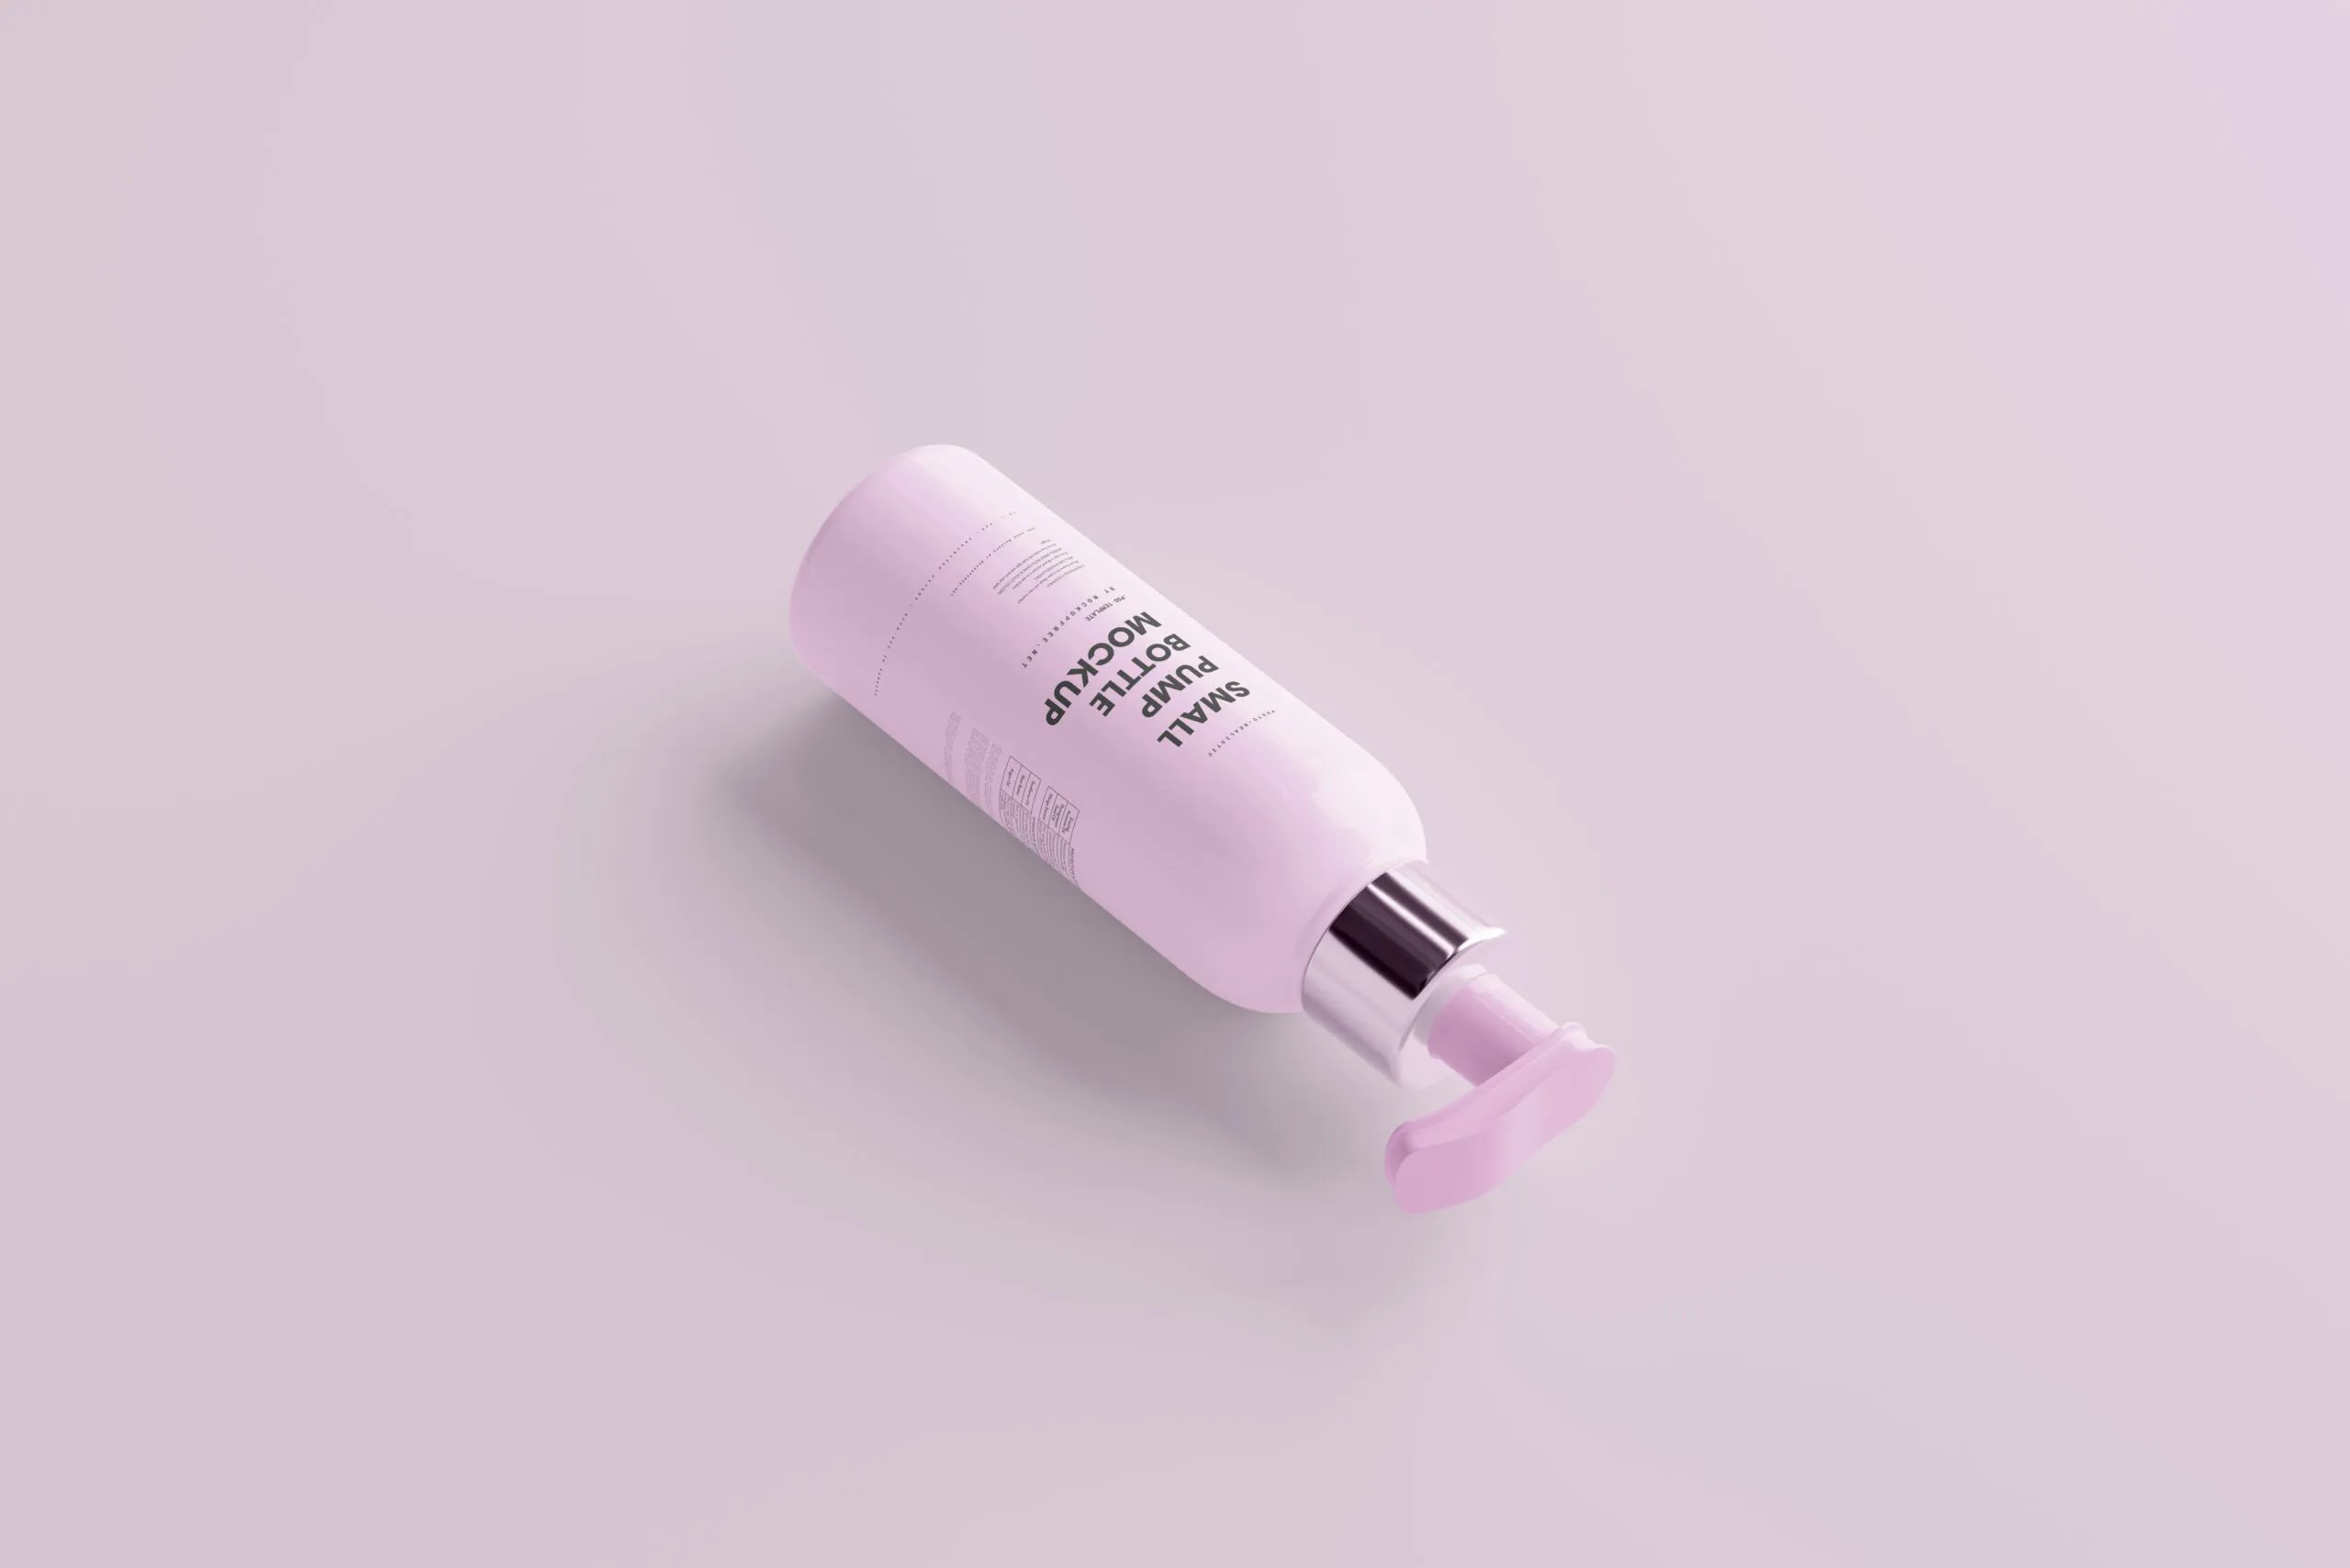 5 Small Pump Bottle Mockup in Front and Perspective Sights FREE PSD